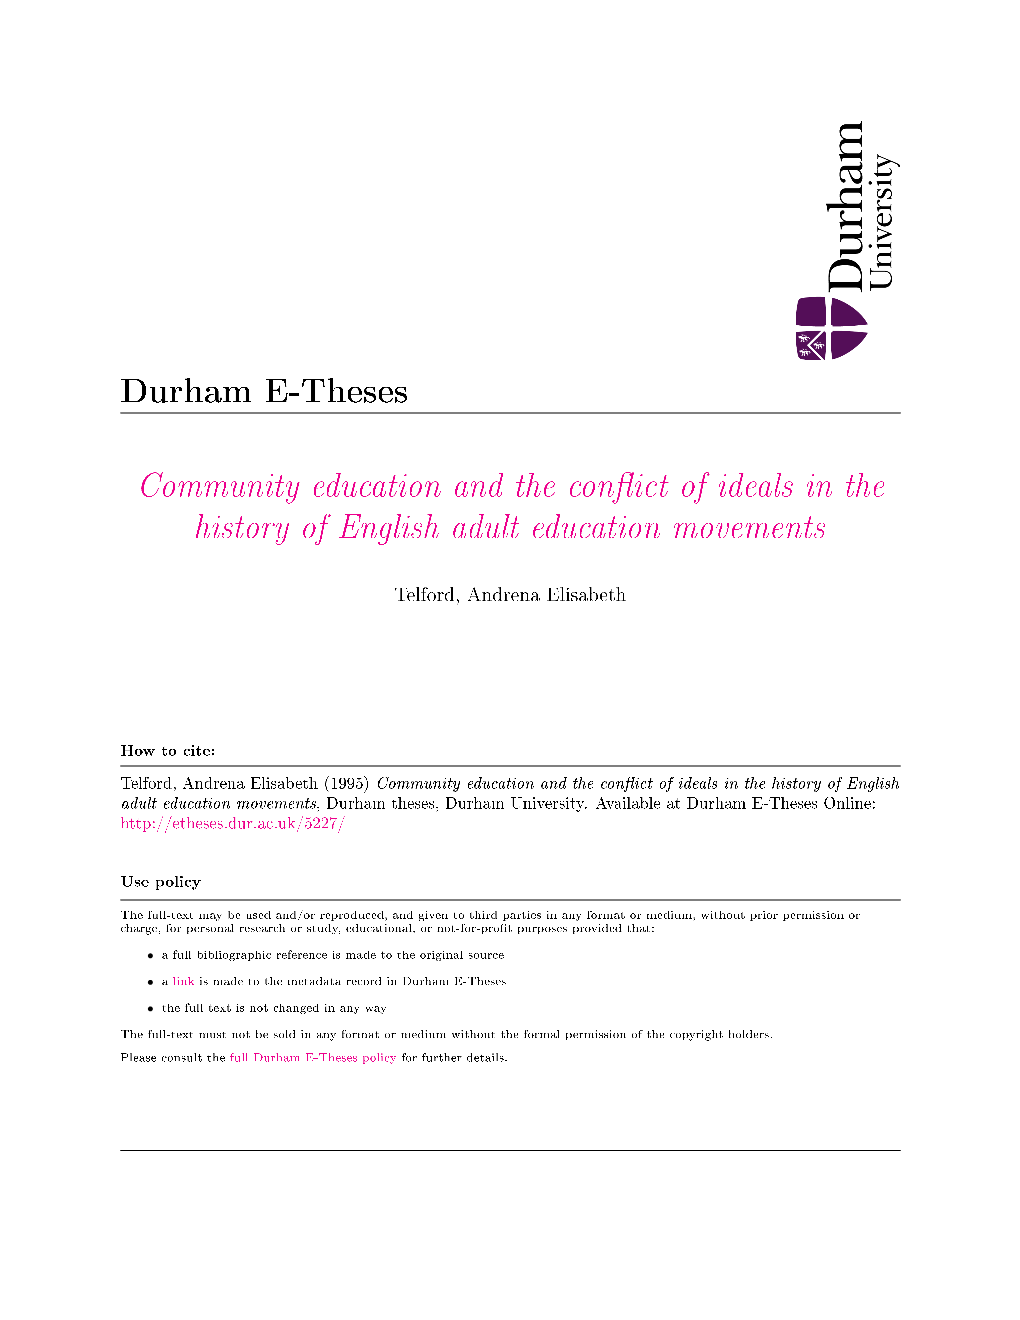 Community Education and the Conflict of Ideals in the History of English Adult Education Movements